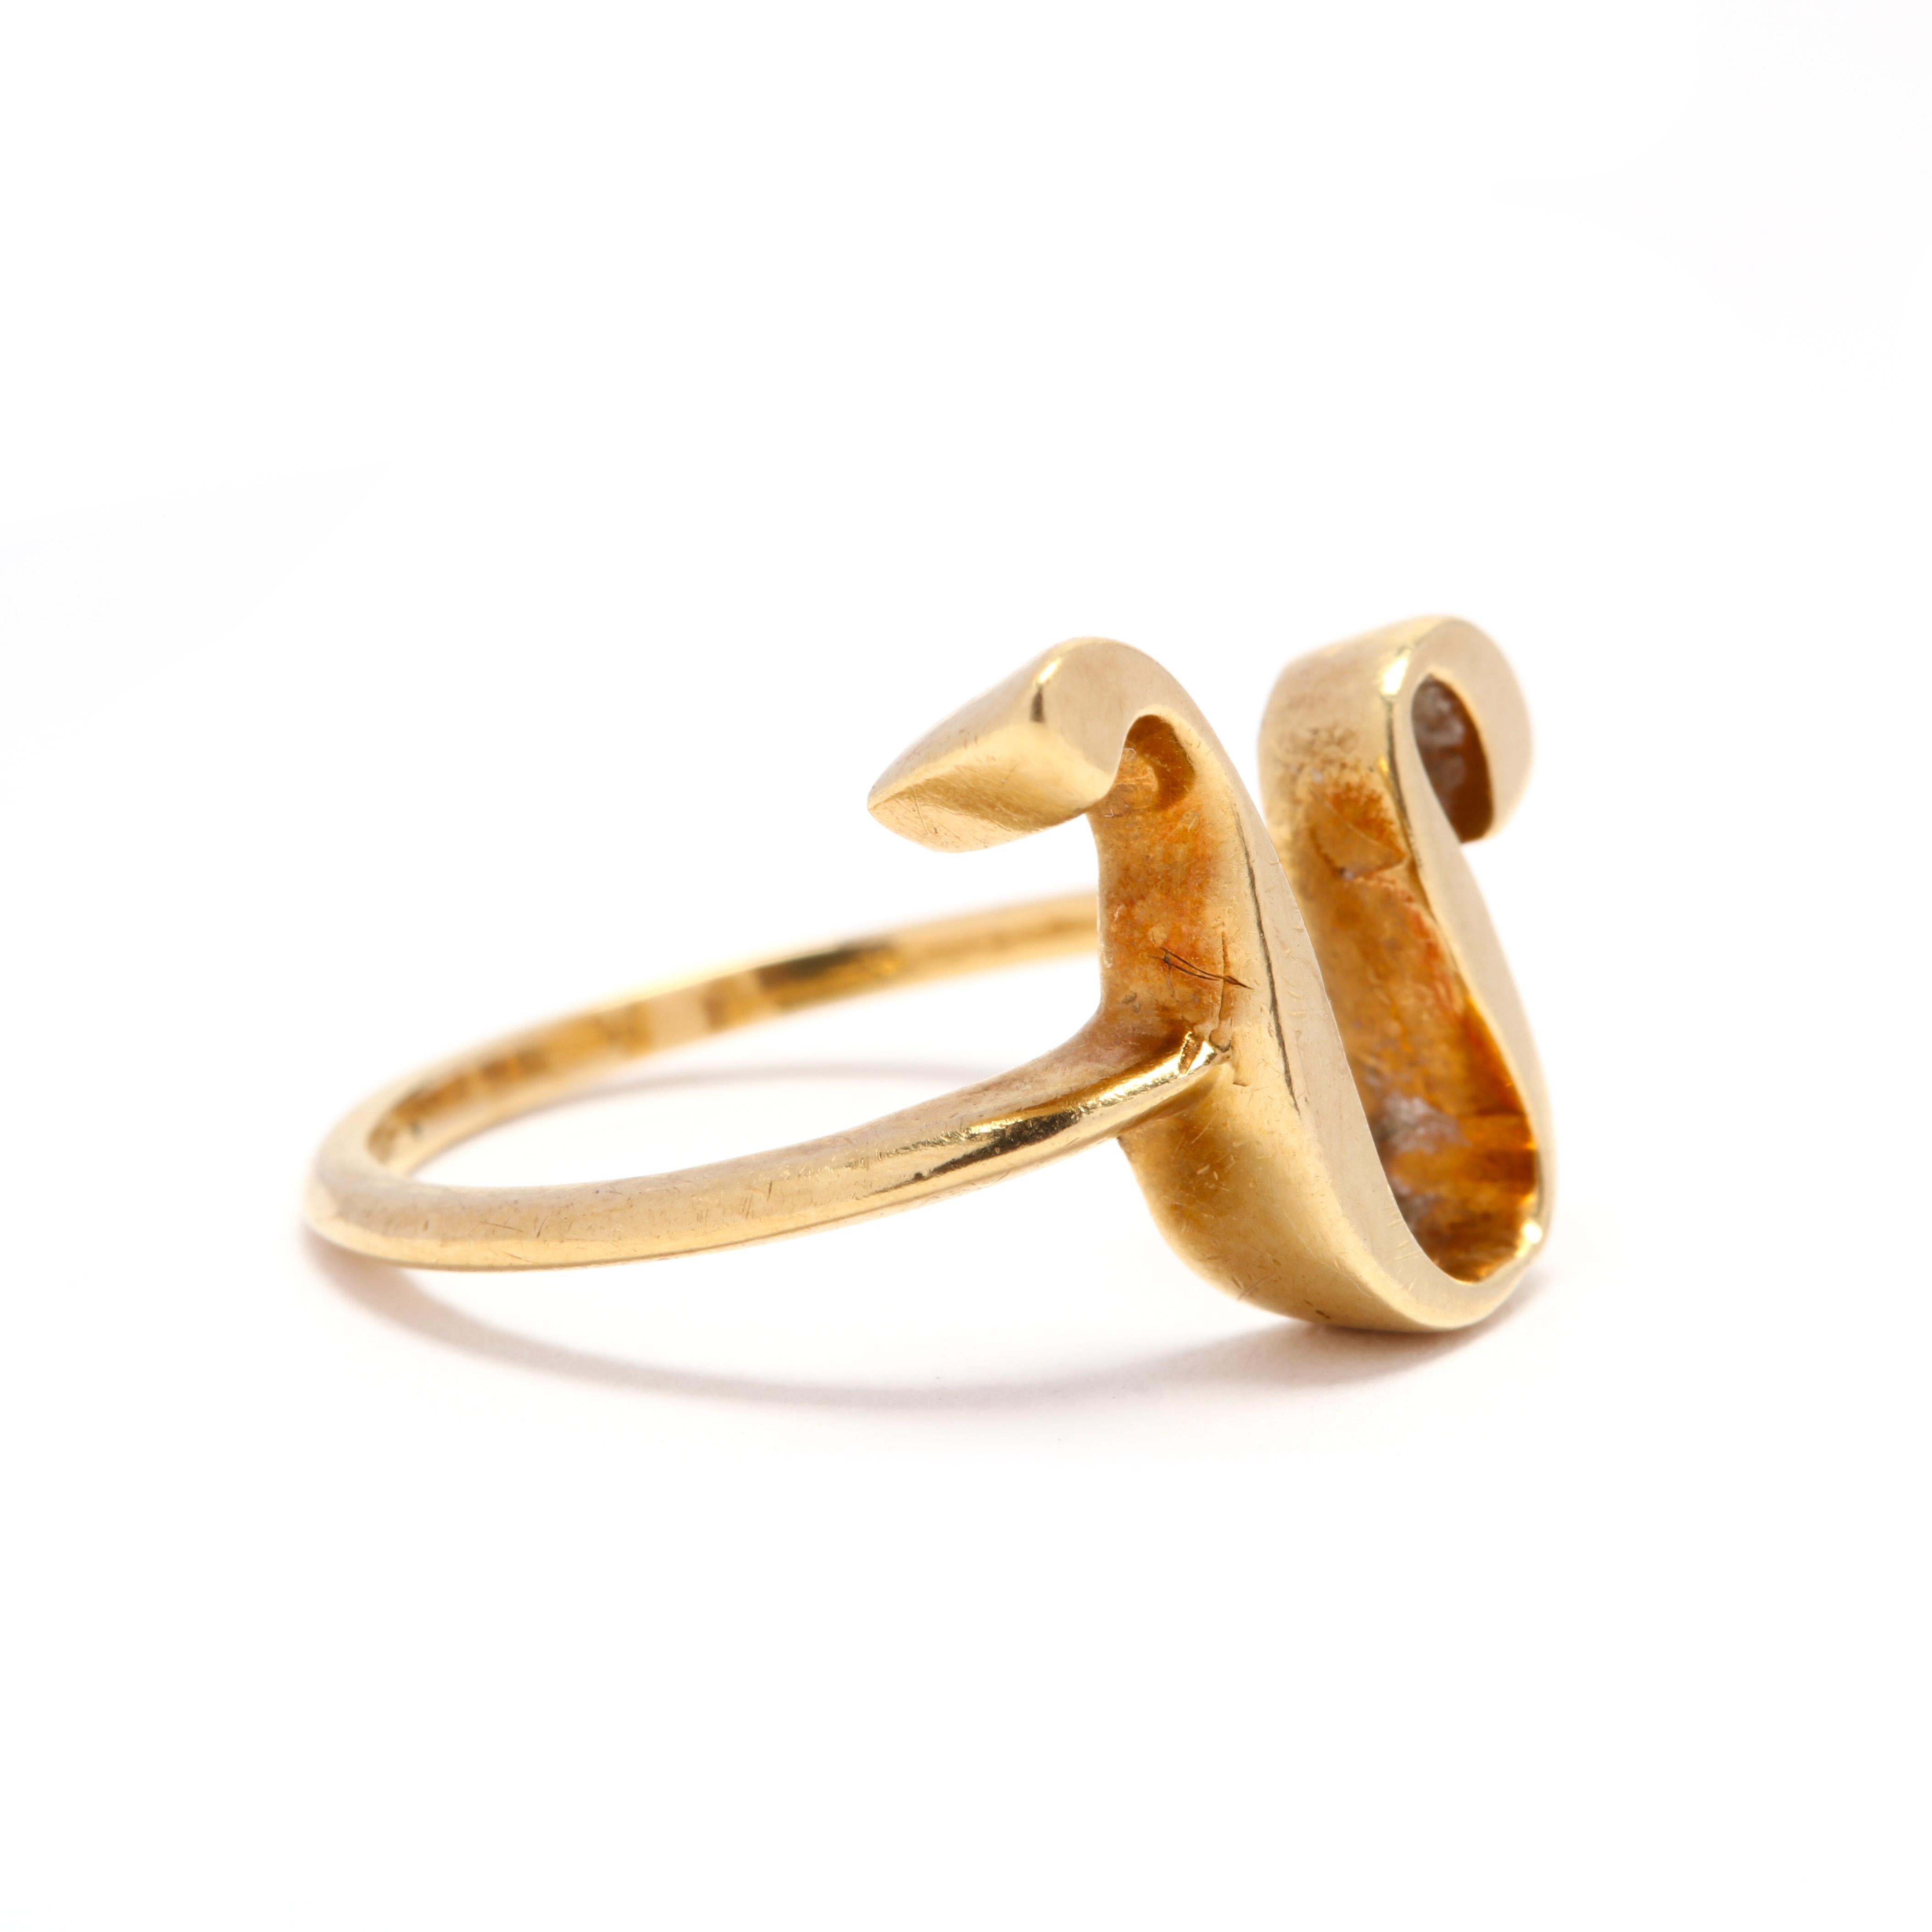 Circa 1960-70s, 18 karat yellow gold leo zodiac ring by Cartier.

Ring Size 7.5

2.9 dwts.

* Please note that this is a vintage item and may show signs of wear. It has been cleaned.